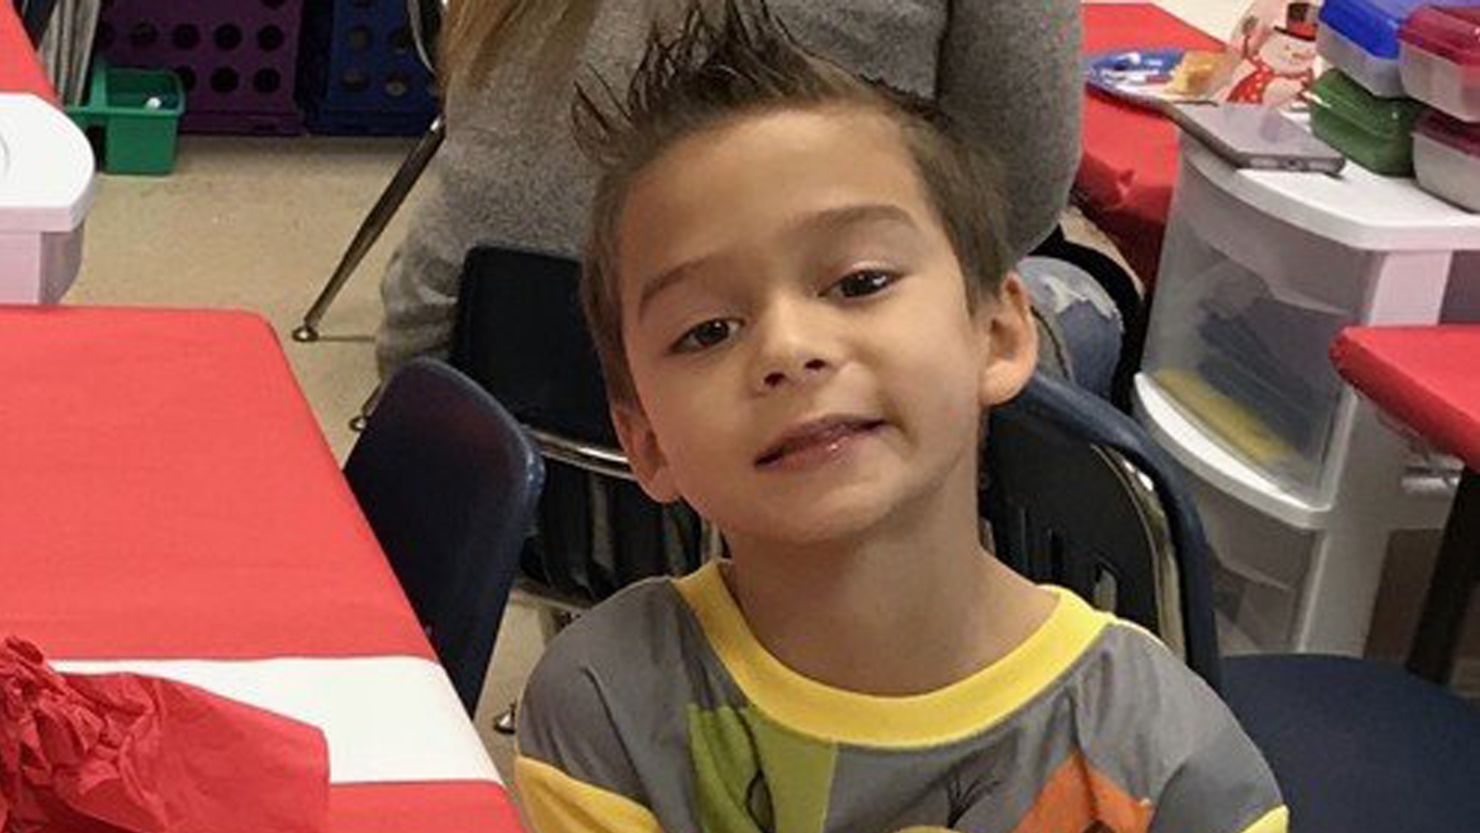 Kameron Prescott, who was fatally shot Thursday, is shown at his school in a photo posted by the Schertz-Cibolo-Universal City Independent School District.